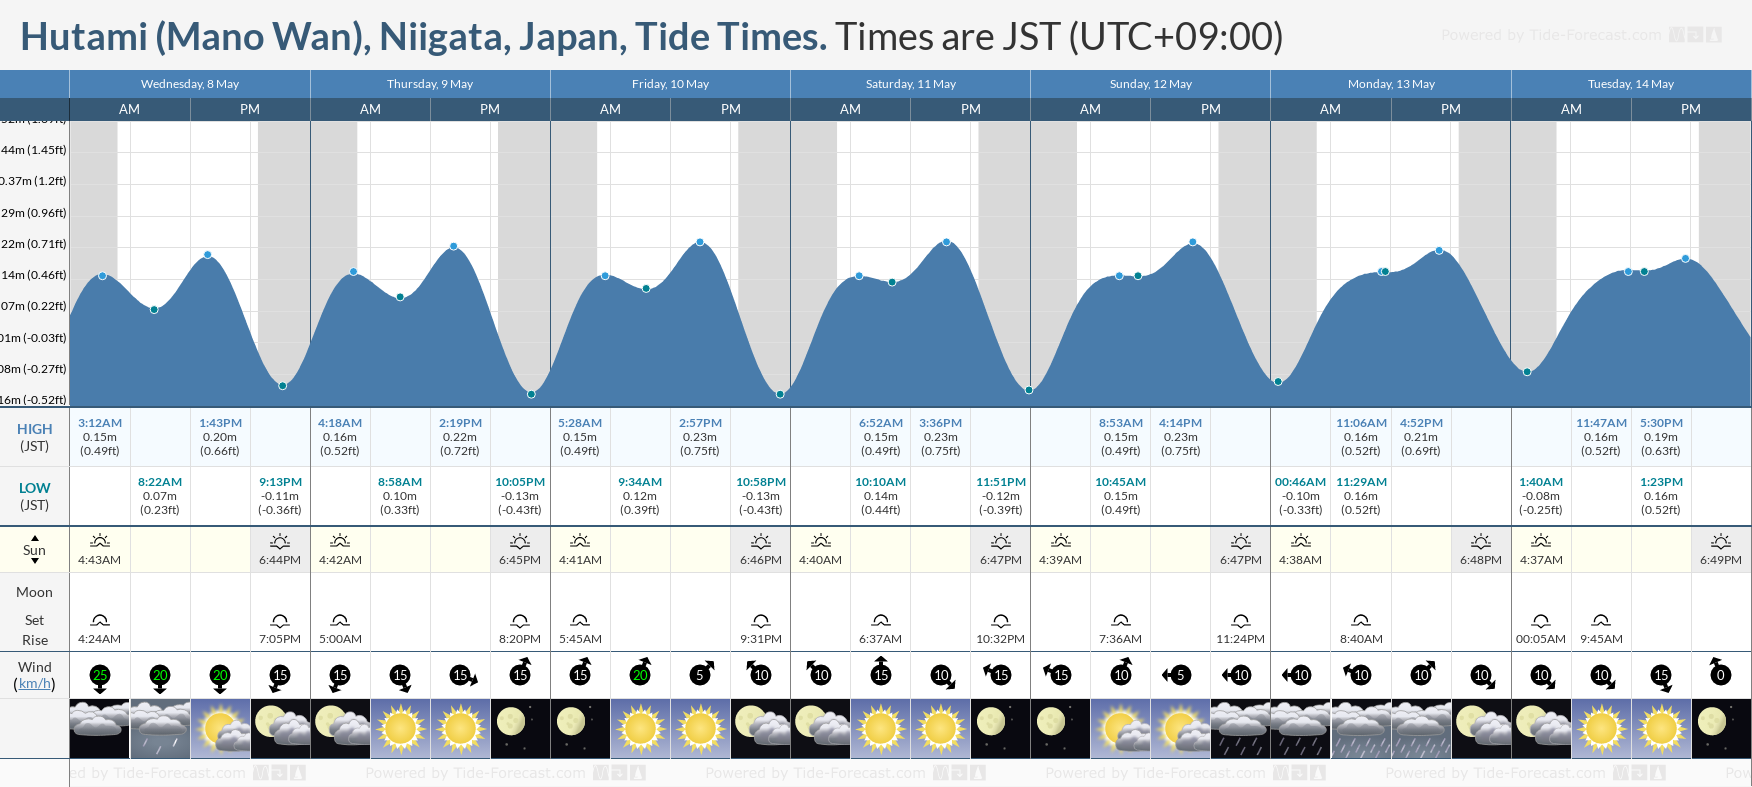 Hutami (Mano Wan), Niigata, Japan Tide Chart including high and low tide times for the next 7 days